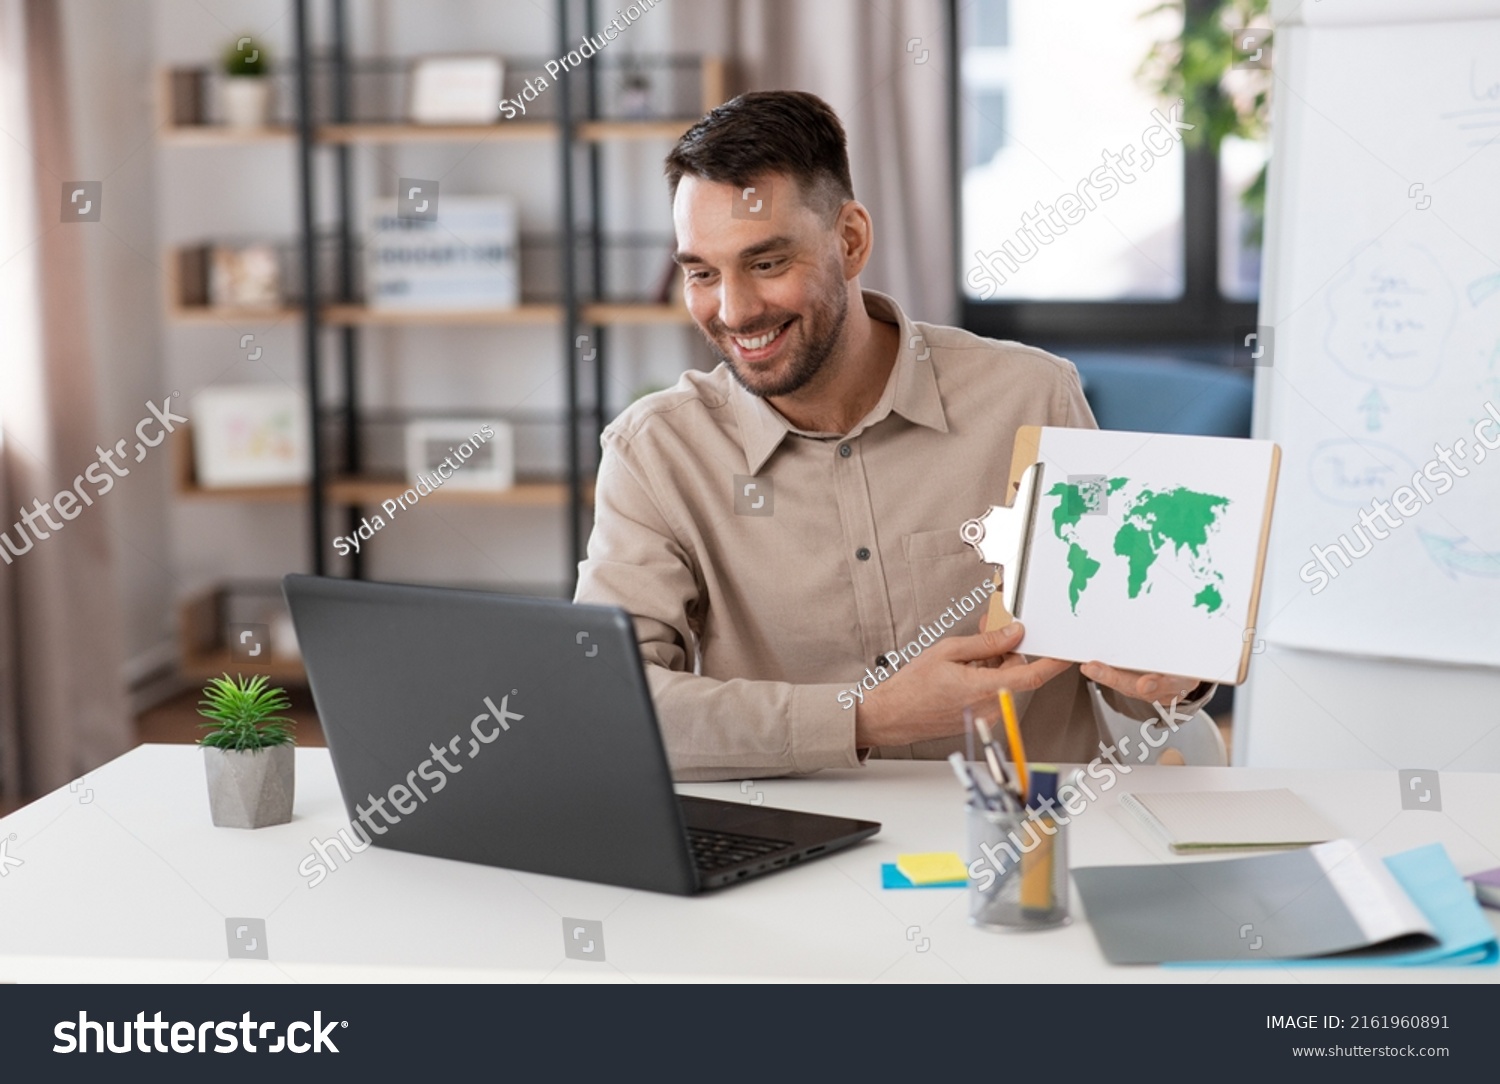 distance education, school and remote job concept - happy smiling male geography teacher with world map and laptop computer having online geography class at home office #2161960891